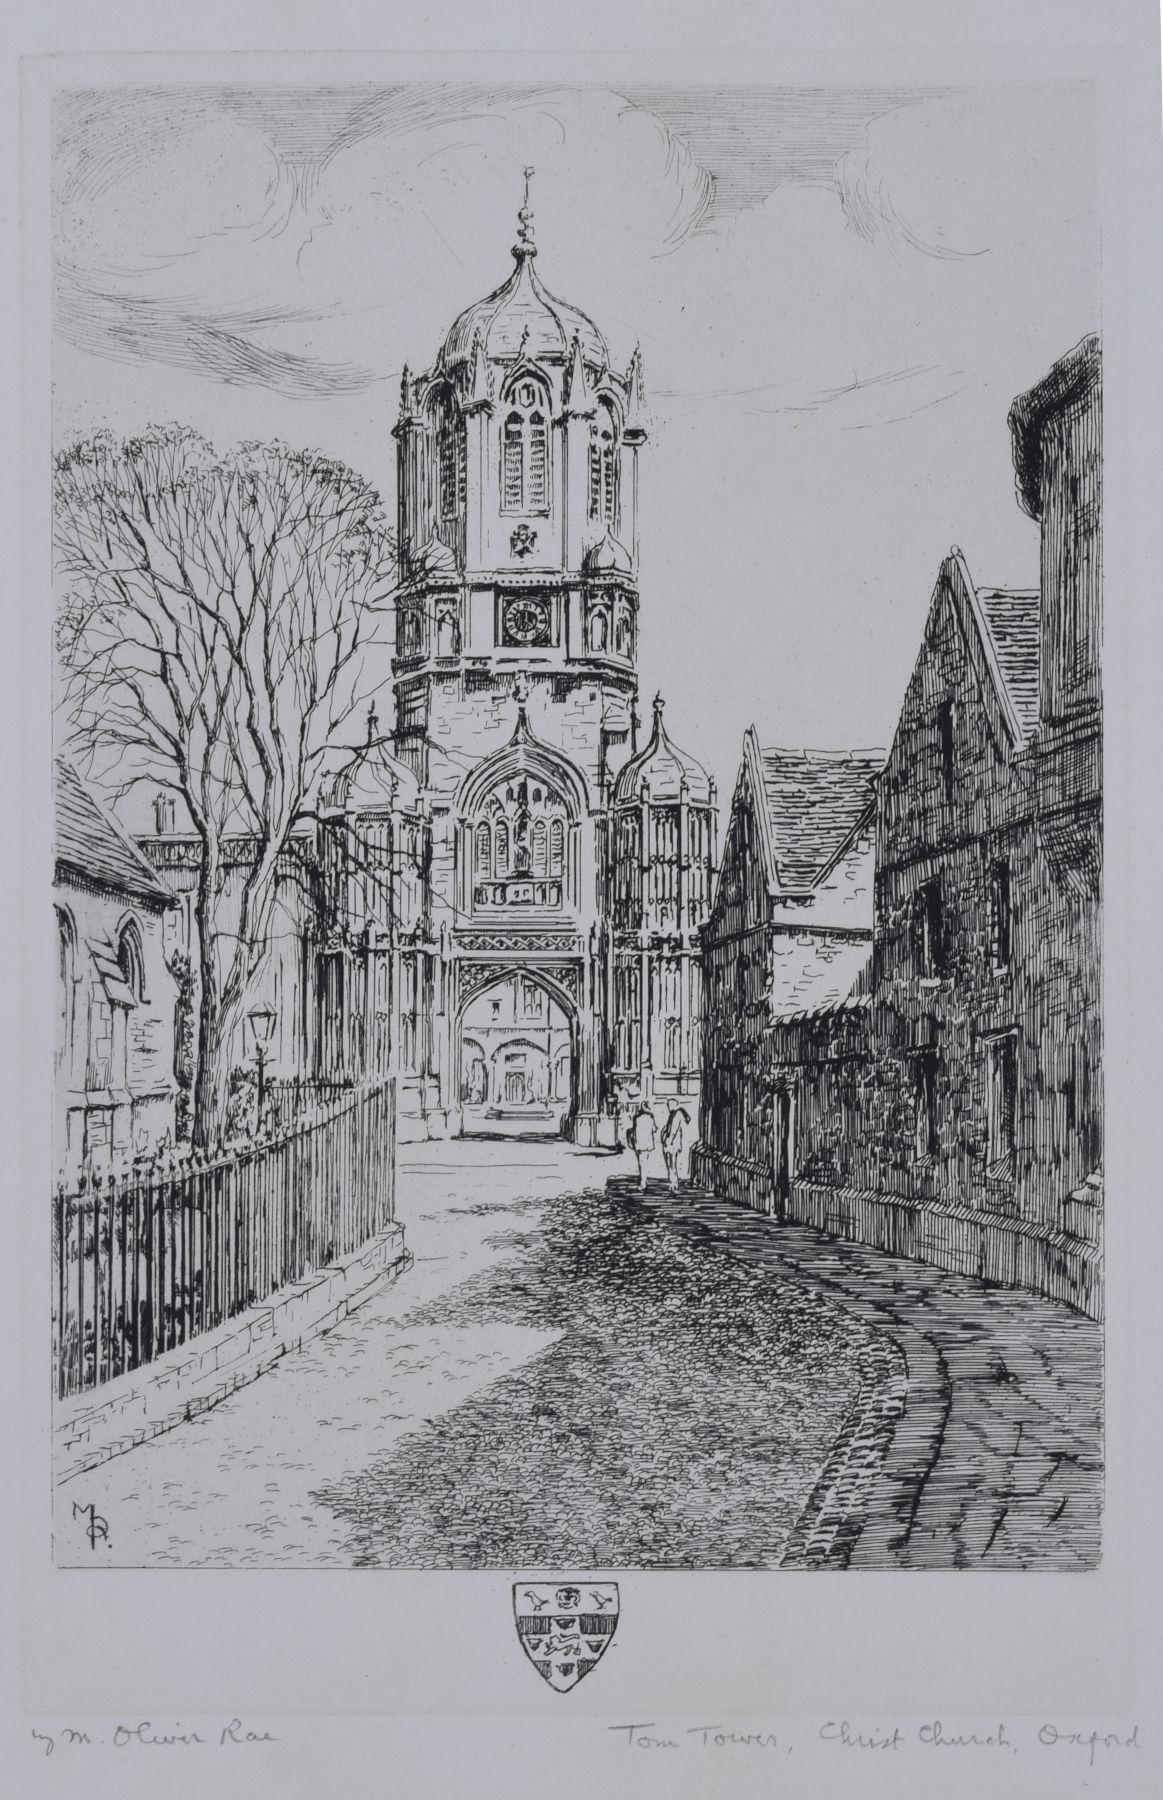 To see our other views of Oxford and Cambridge, scroll down to "More from this Seller" and below it click on "See all from this Seller" - or send us a message if you cannot find the view you want.

Mabel Oliver Rae (1868 - 1956)
Tom Tower, Christ